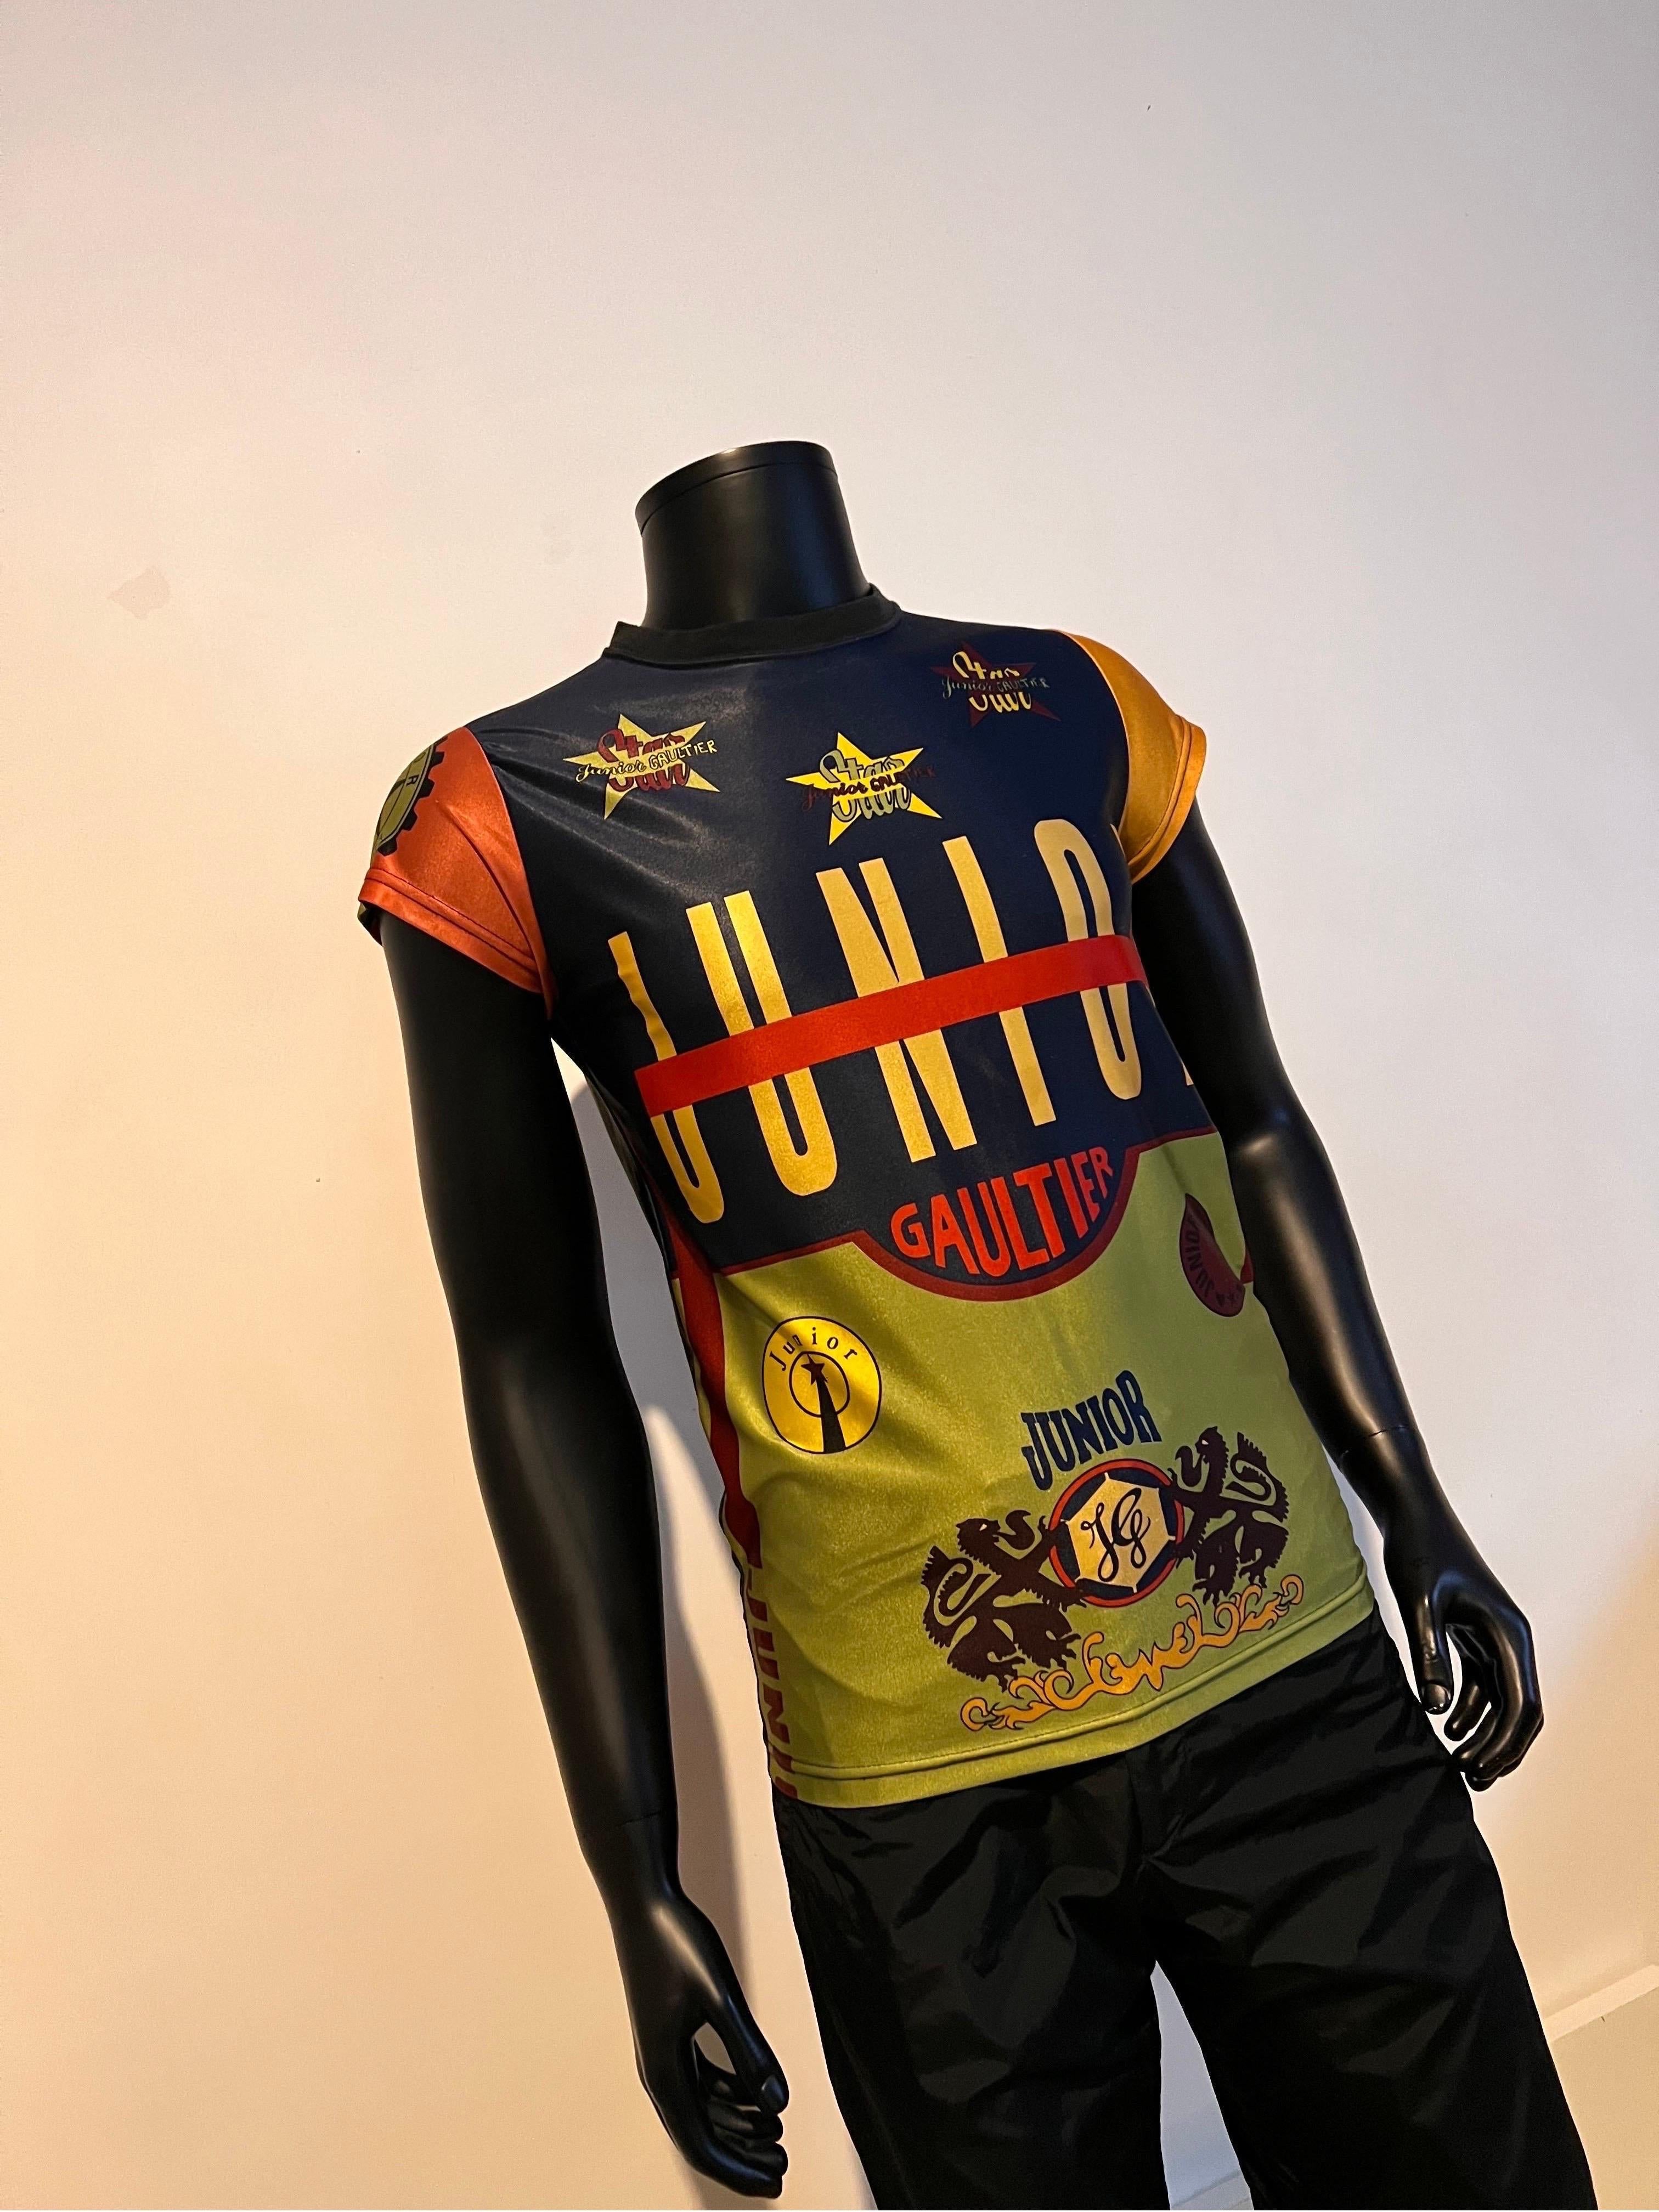 Junior Gaultier by JEAN PAUL GAULTIER vintage iconic multicoloured tee-shirt.

This tee shirt features multicolored graphic blocks with iconic JUNIOR GAULTIER/JPG print.
Ribbed textured round neck, short sleeves, stretch shiny jersey.

This highly